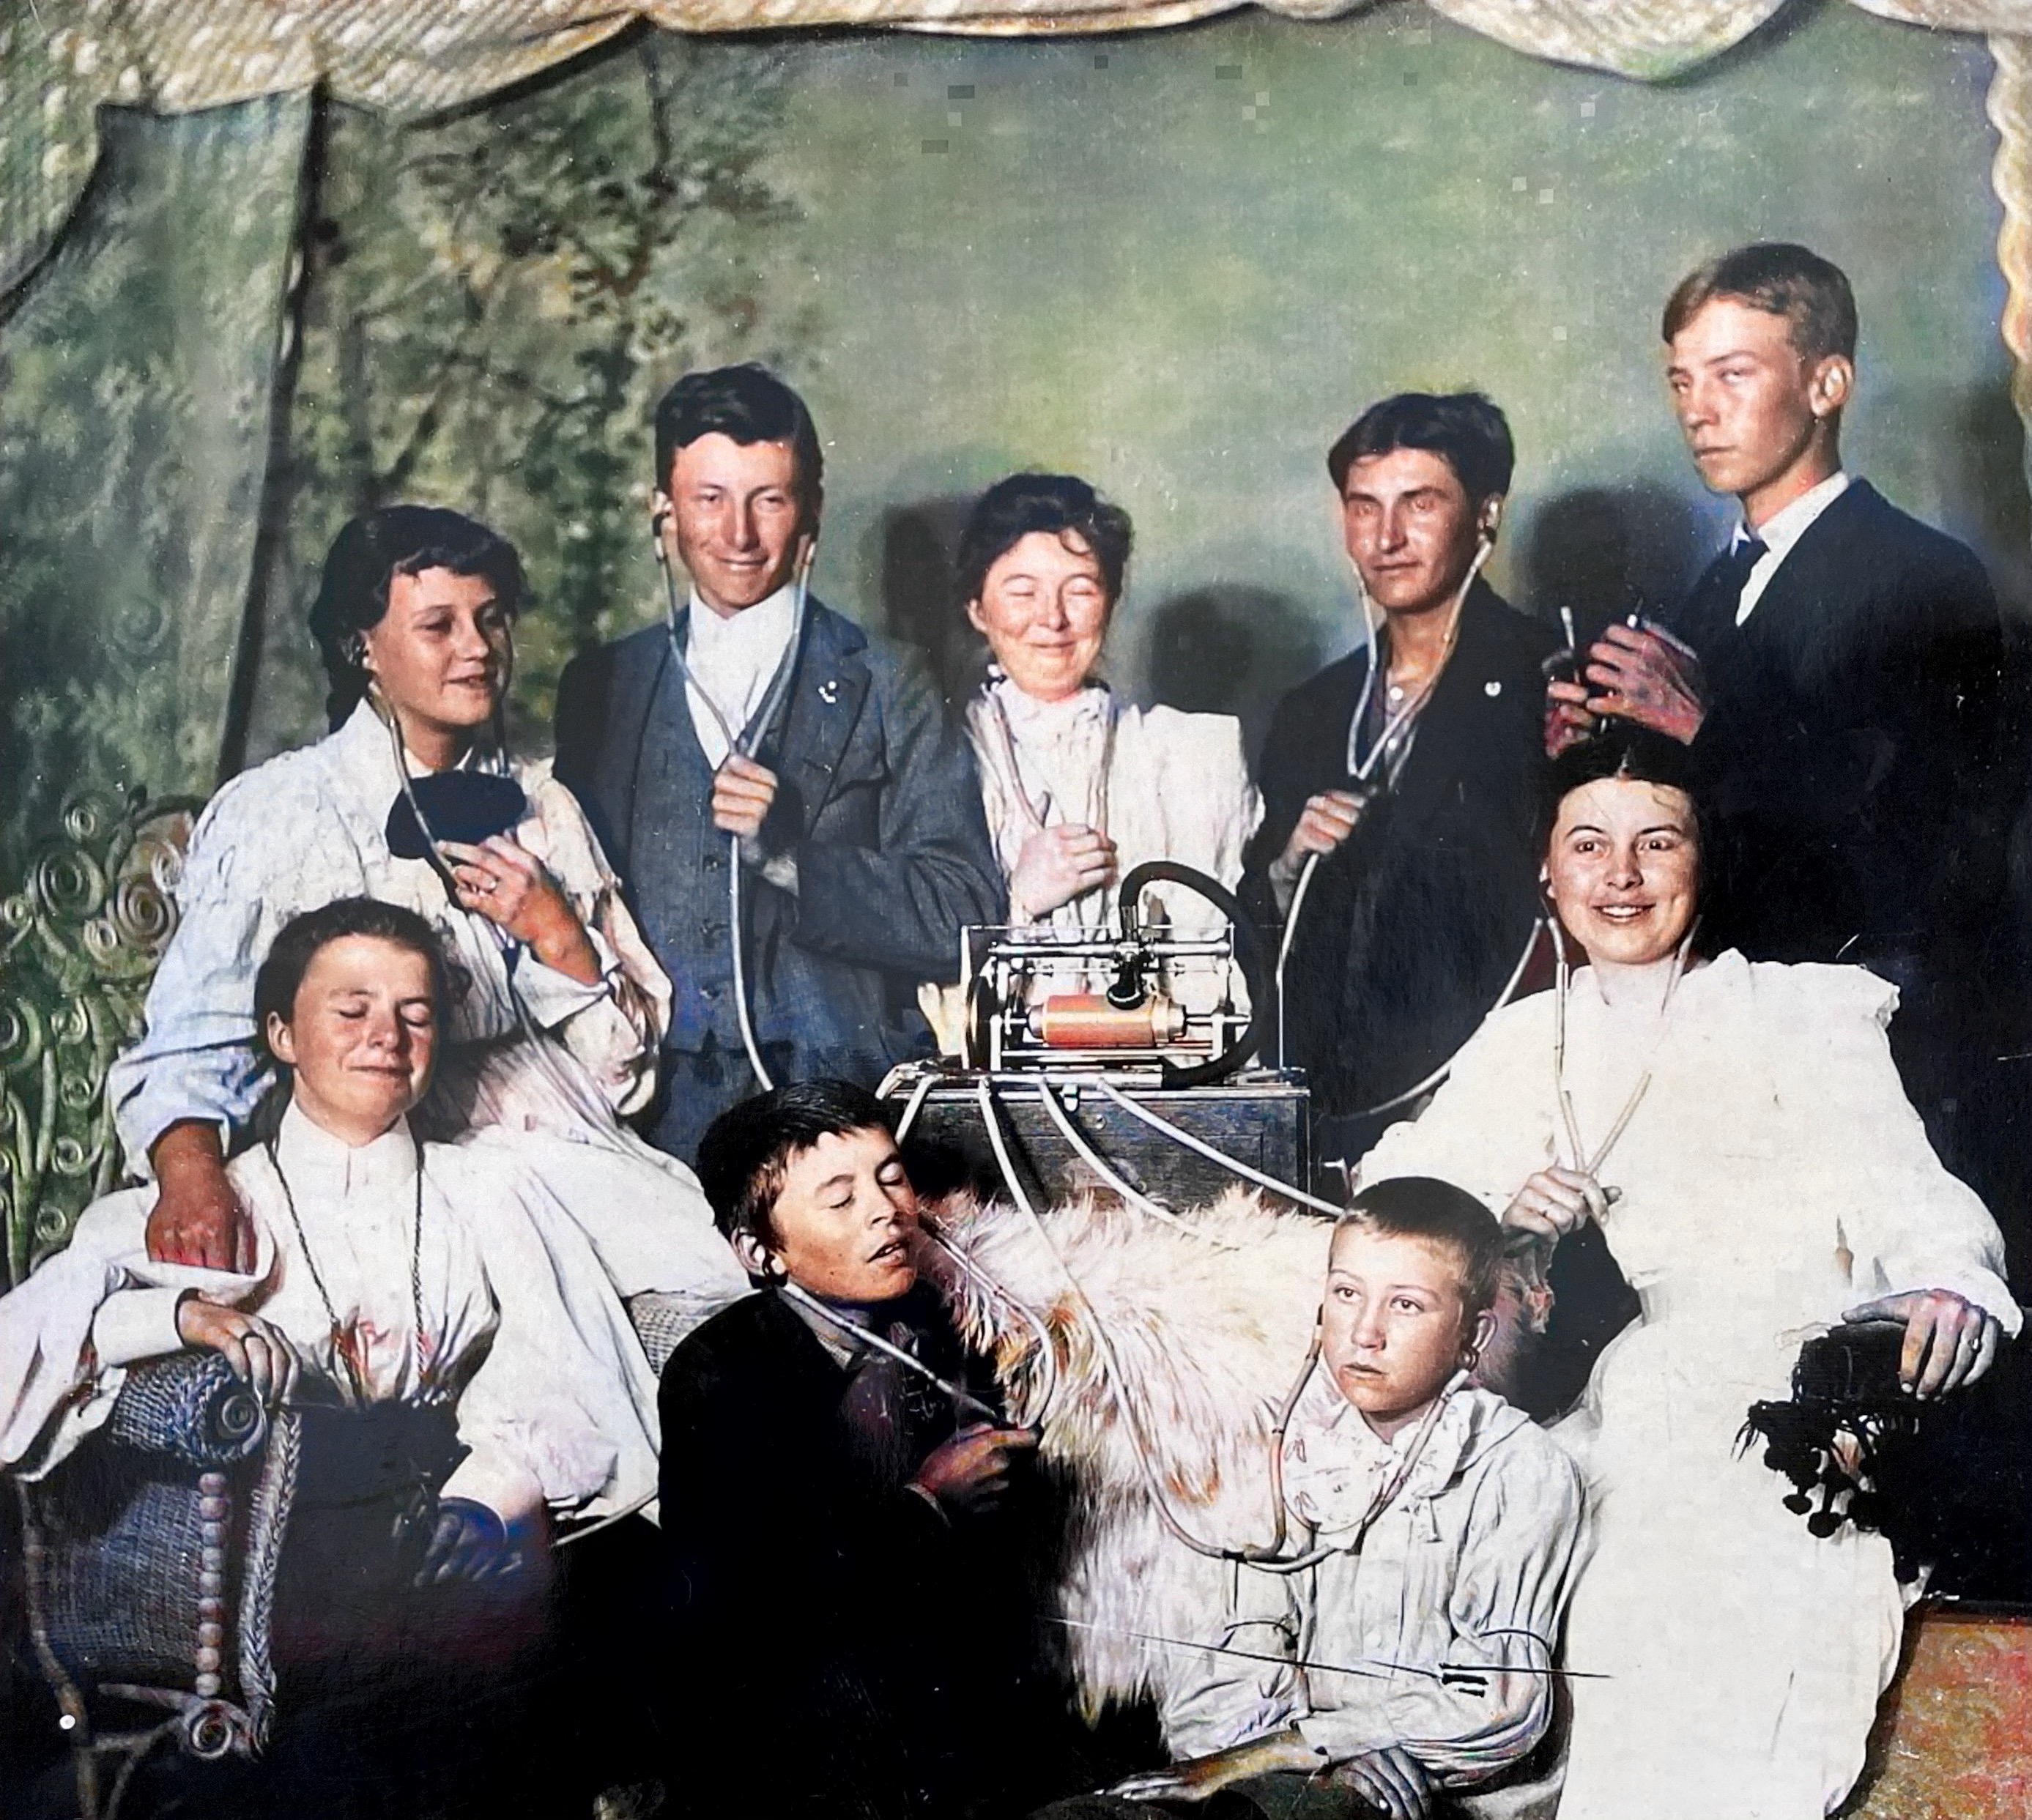 Alice McFadden (far left, back row) listen to Wax Cylinder, which was invented and commercially sold in late 1880s. Picture date estimate 1900 (Alice born 1881).